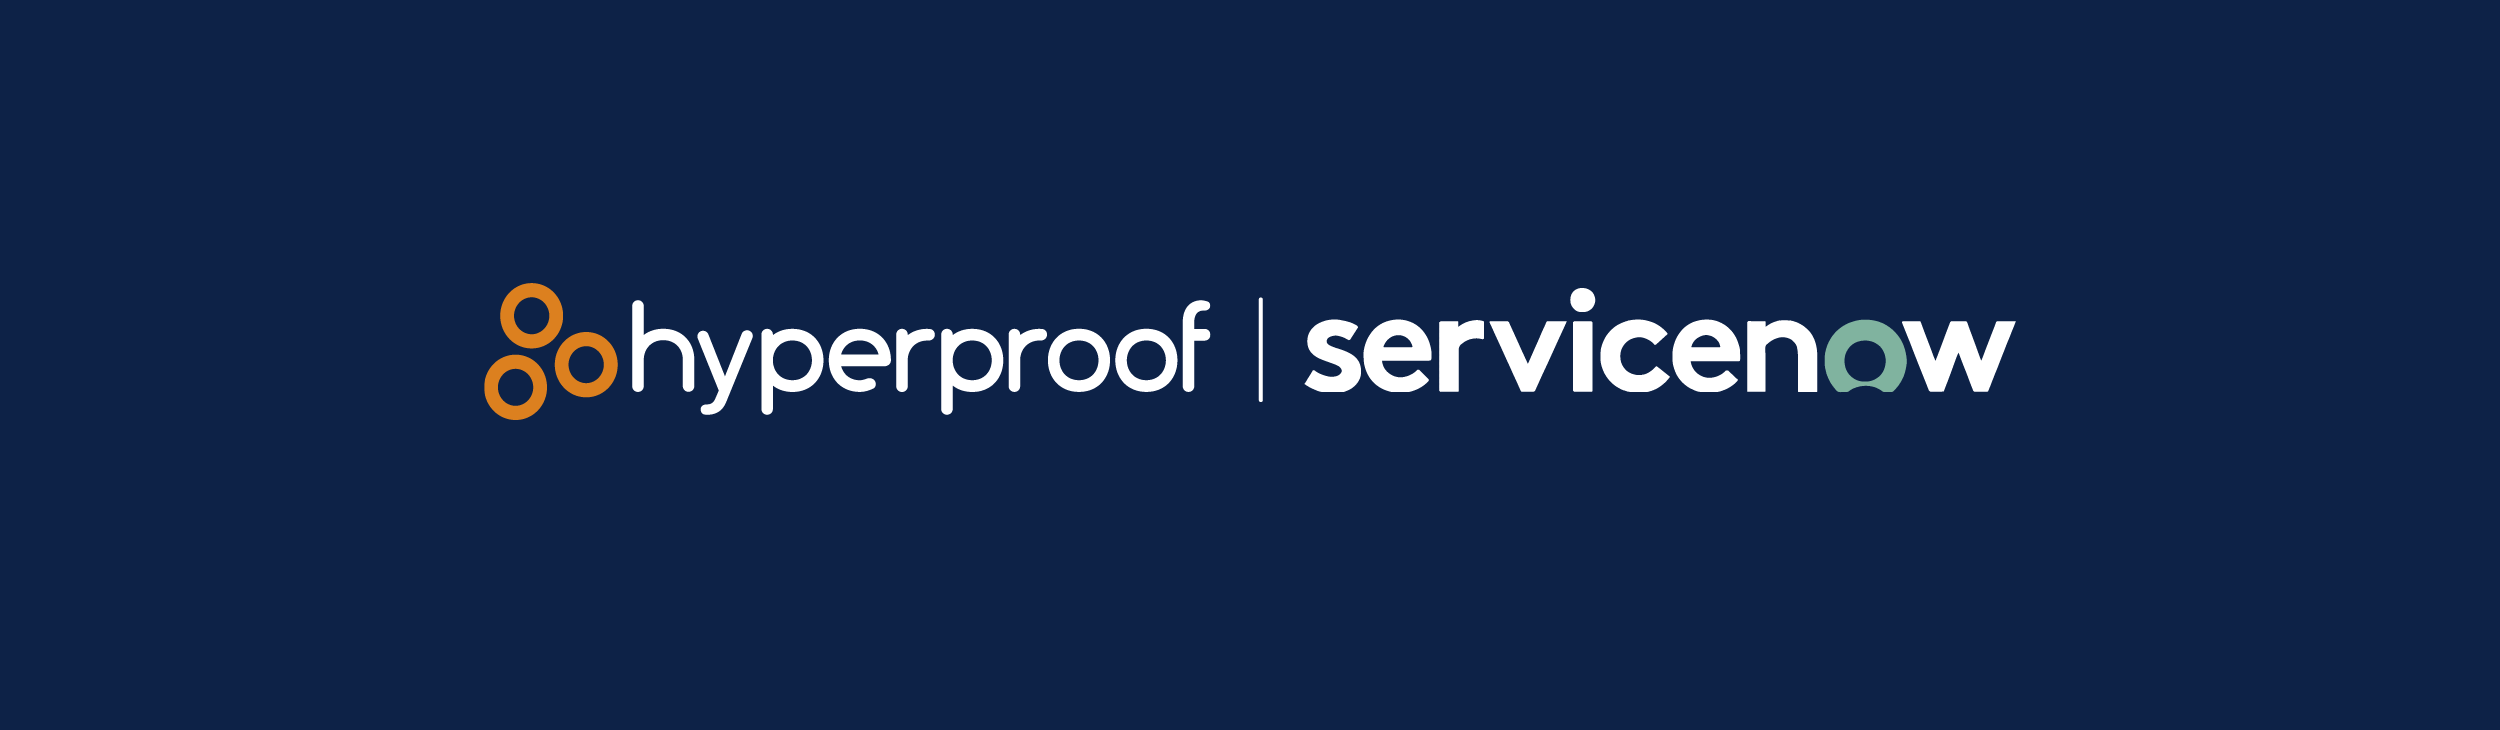 hyperproof and servicenow